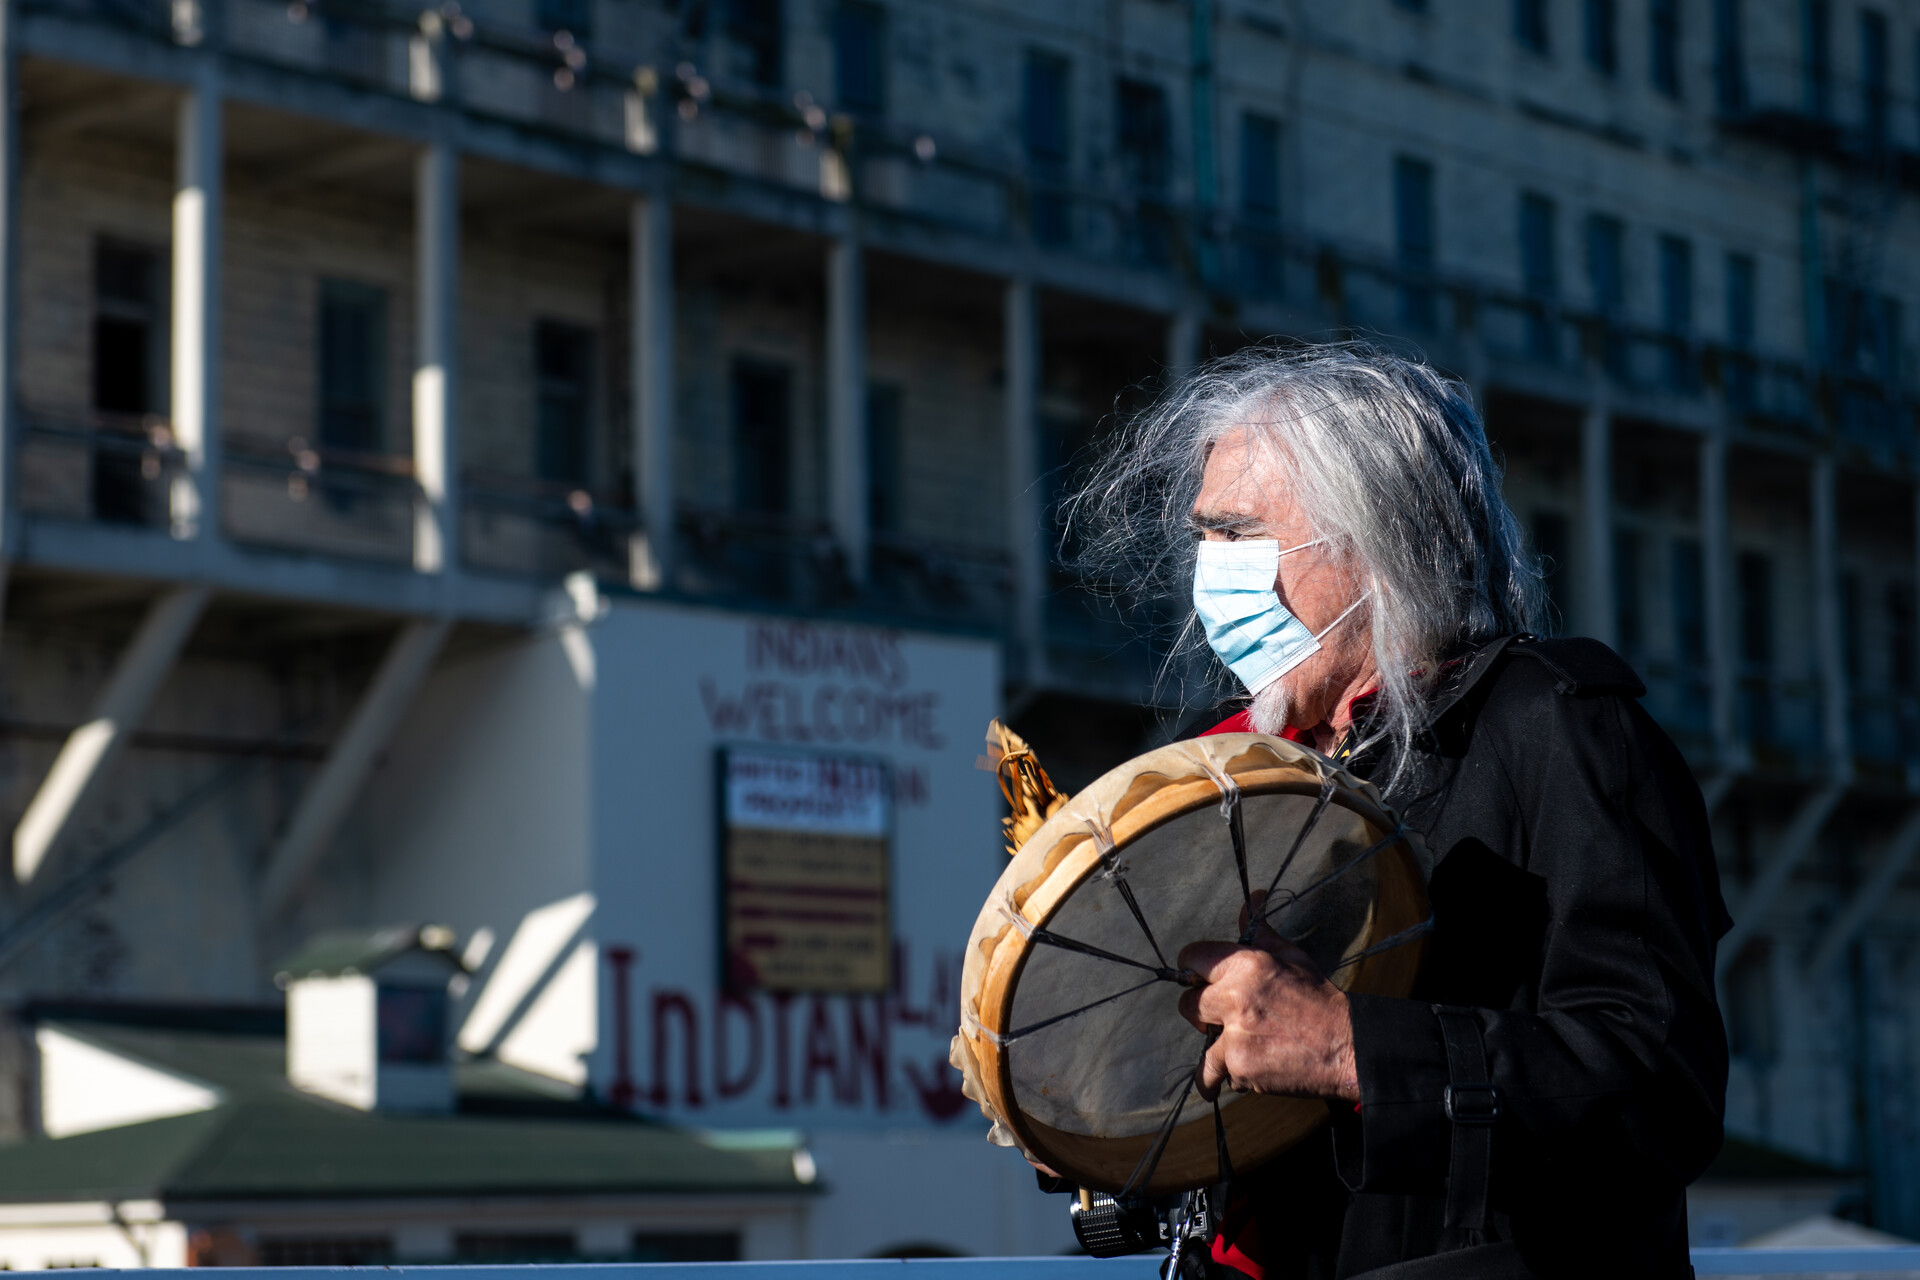 A man with long gray hair bangs a ceremonial drum outside a former prison building on Alcatraz Island.